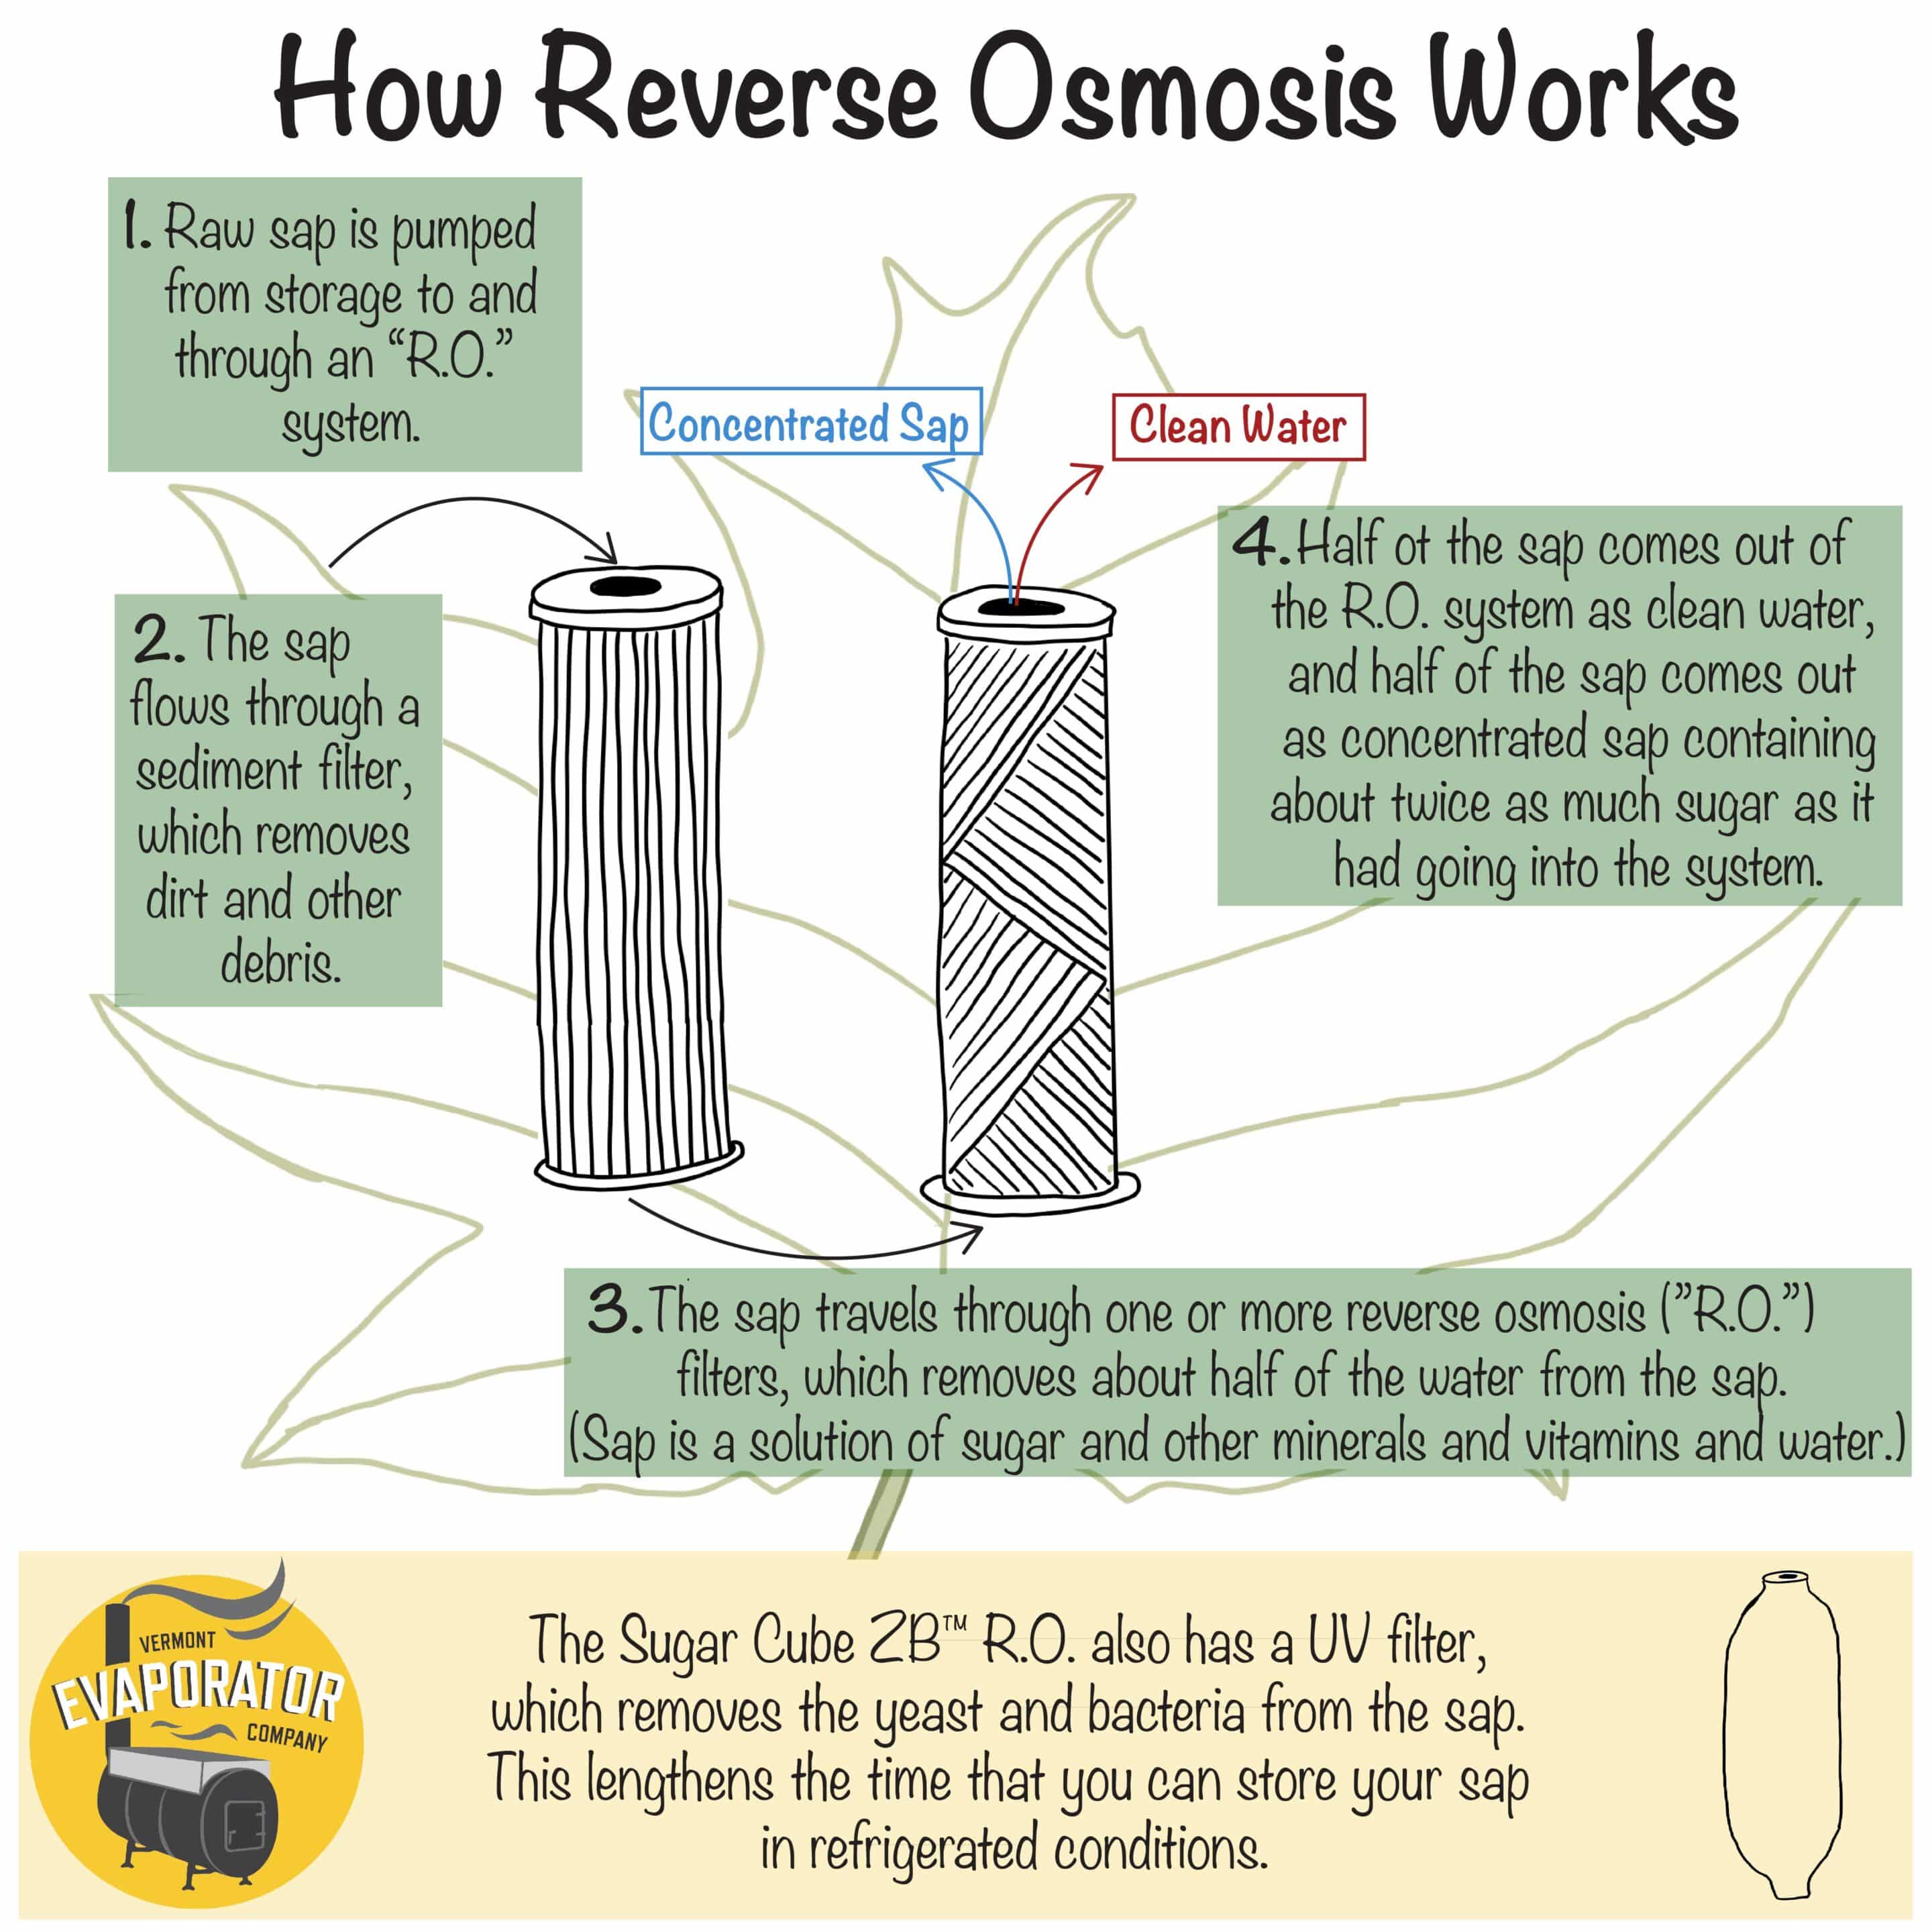 A drawing showing how a reverse osmosis works